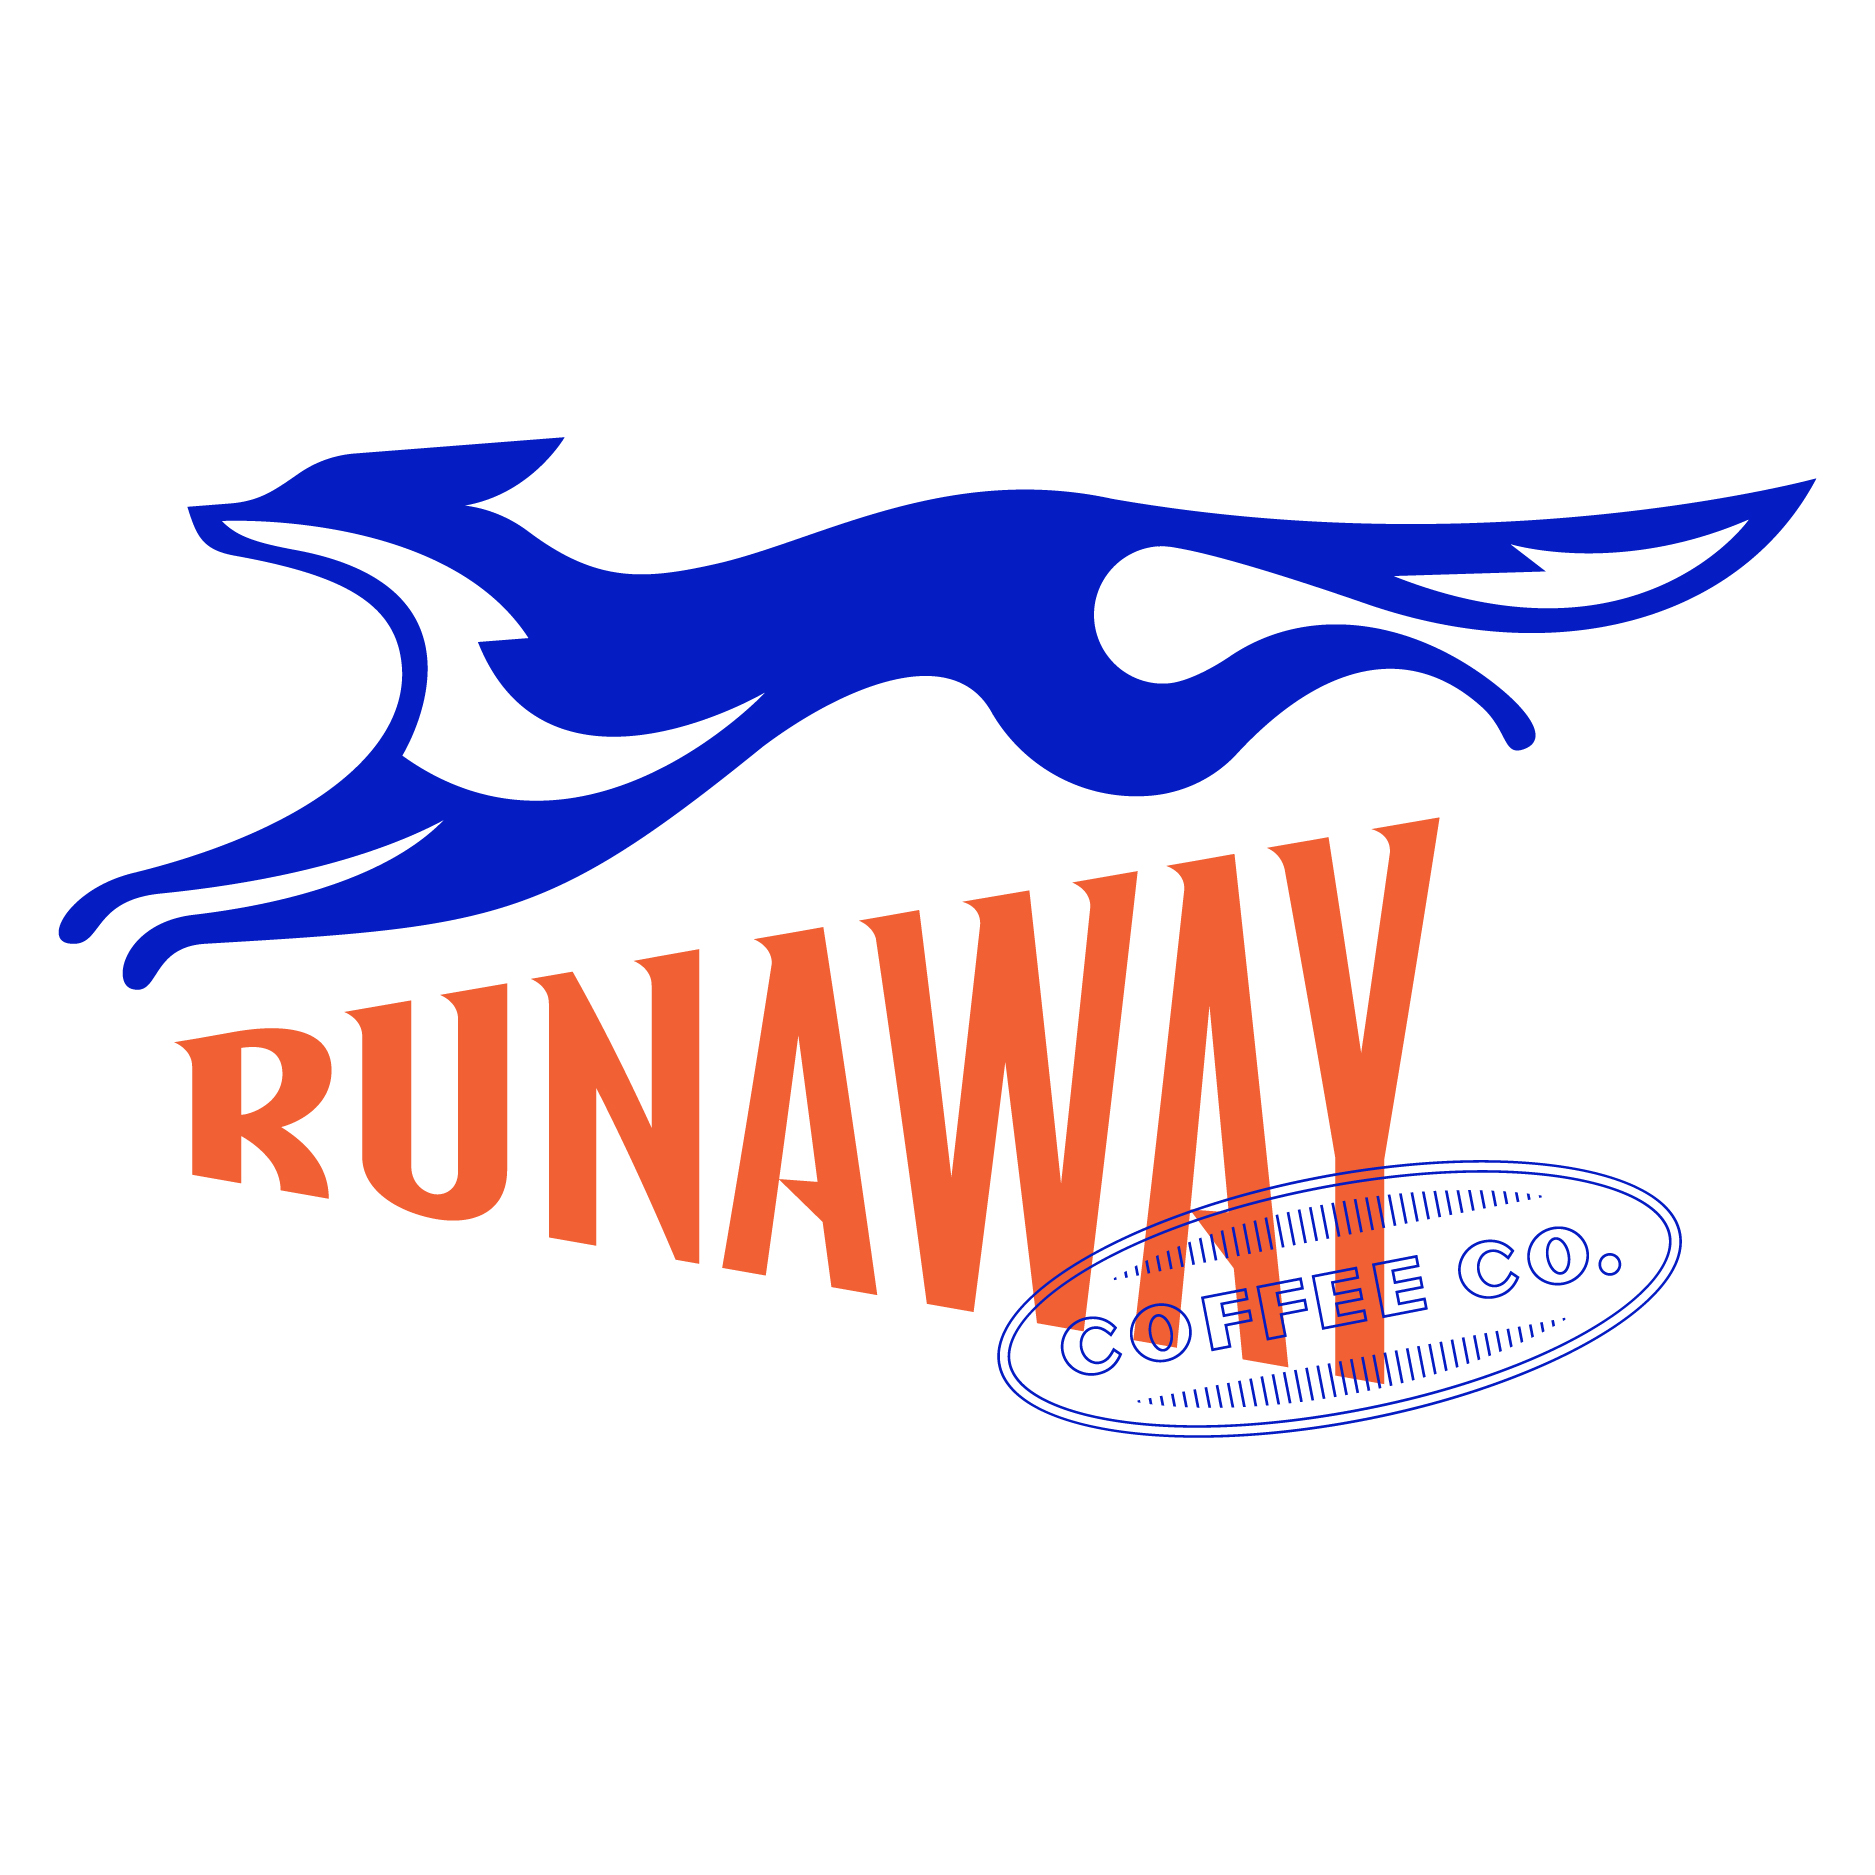 Runaway Coffee Co. logo design by logo designer Ellen Mosiman for your inspiration and for the worlds largest logo competition